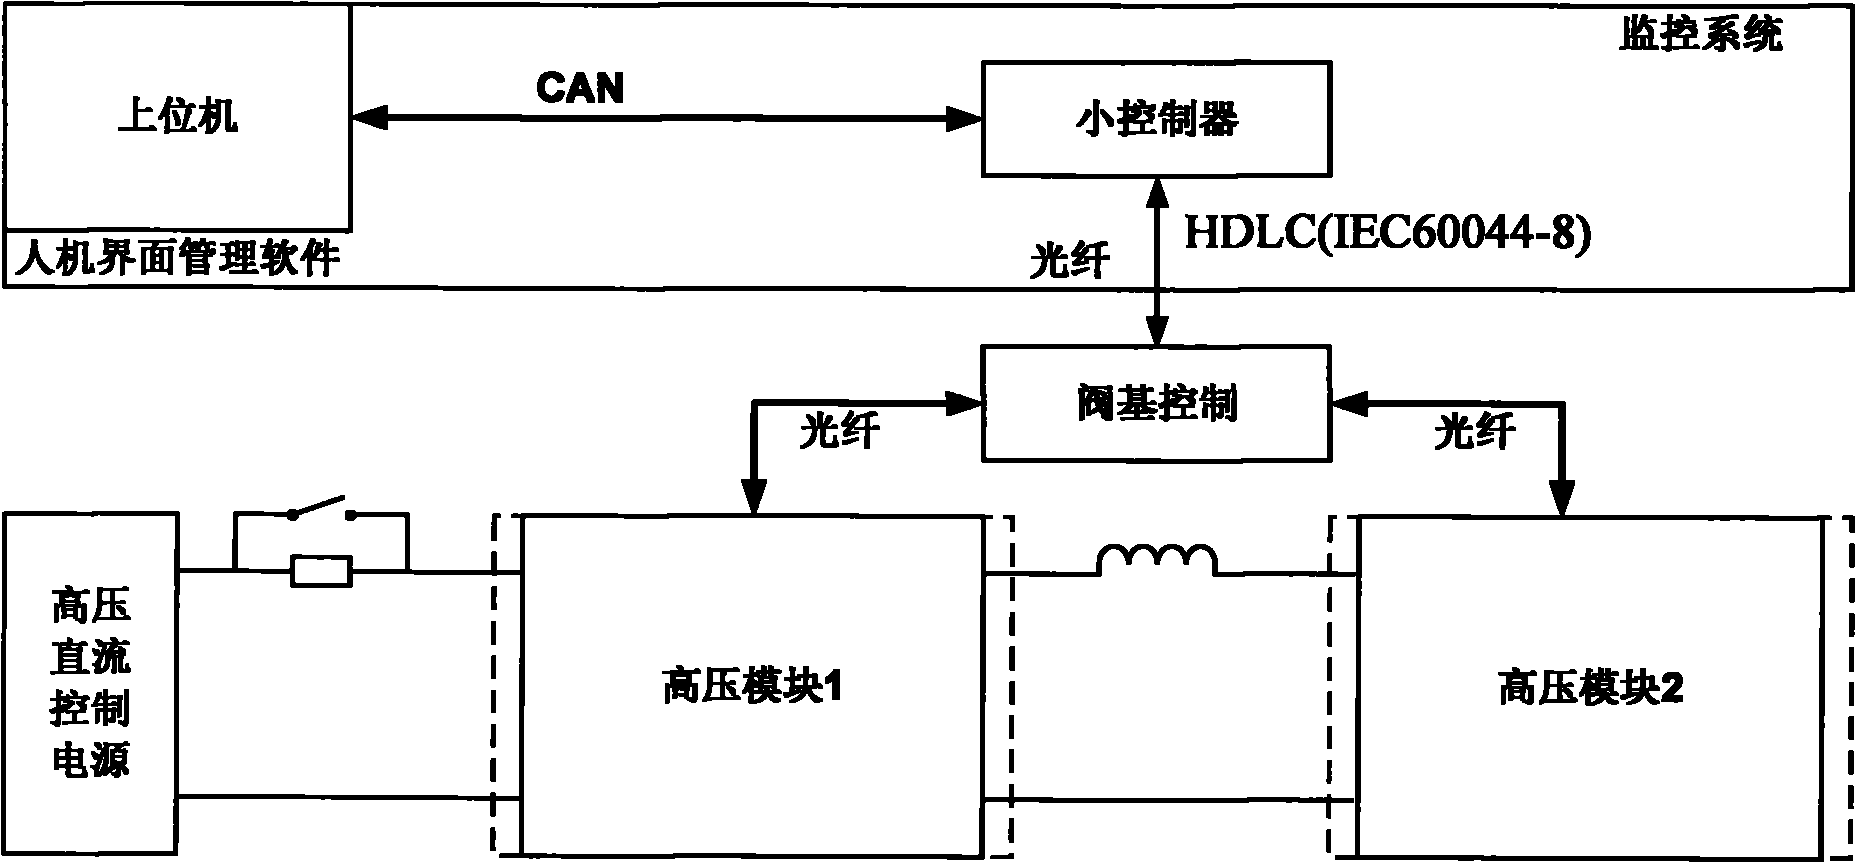 Monitoring system for high-voltage sub-module test